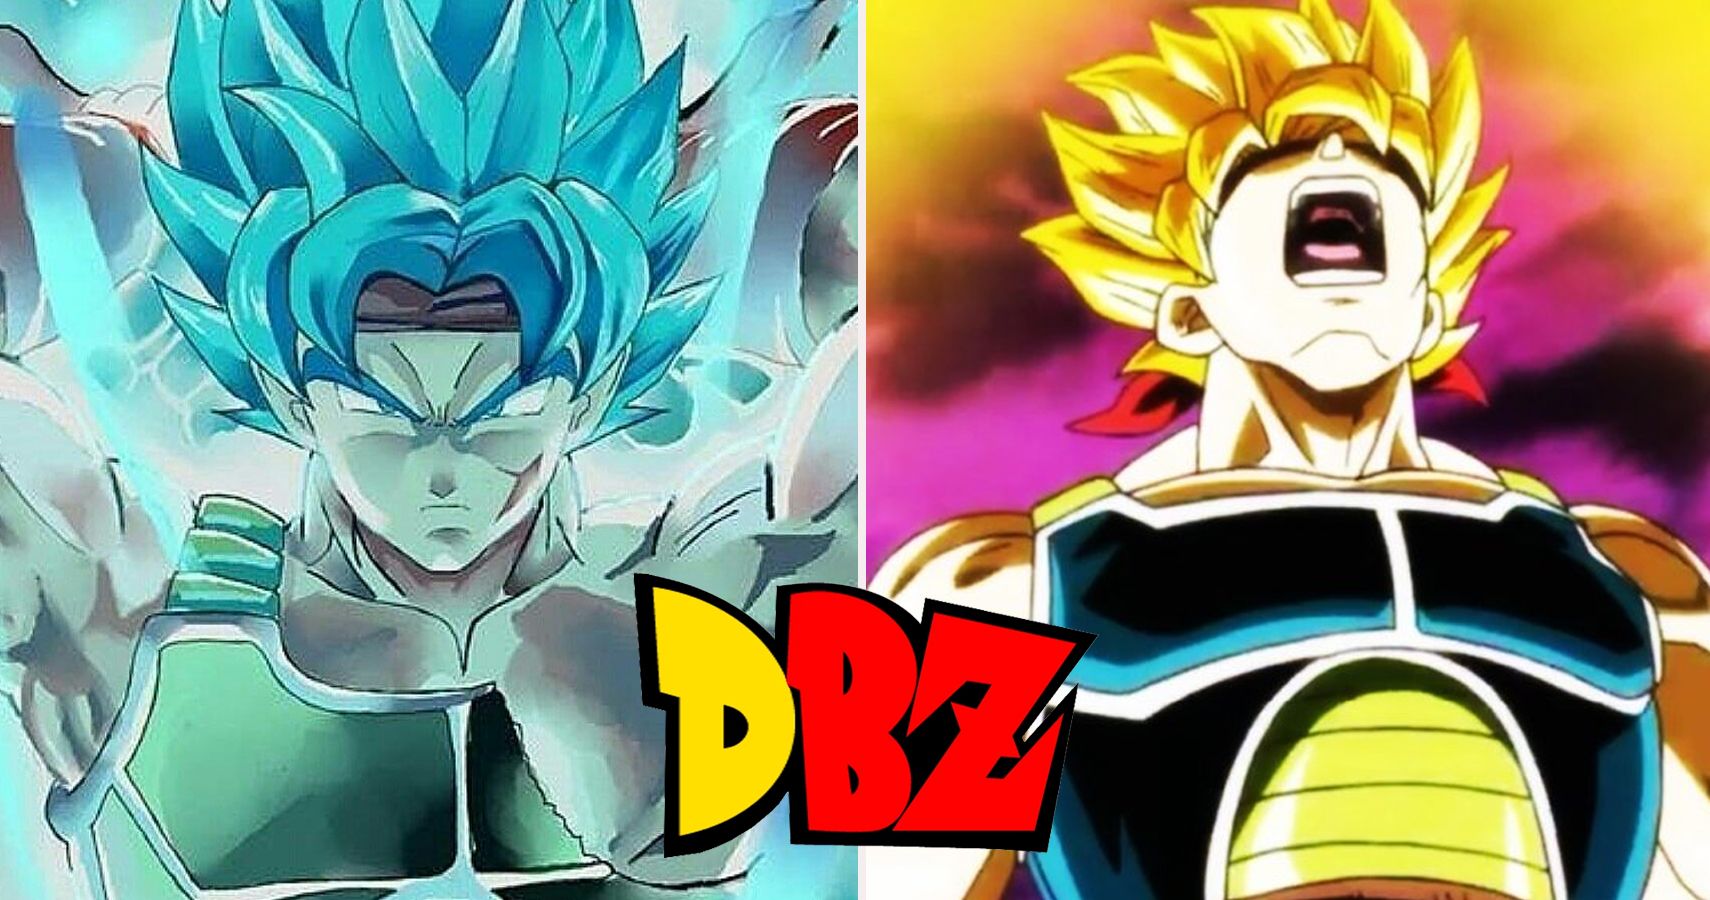 Which episode in DBZ did Goku meet his father Bardock? - Quora